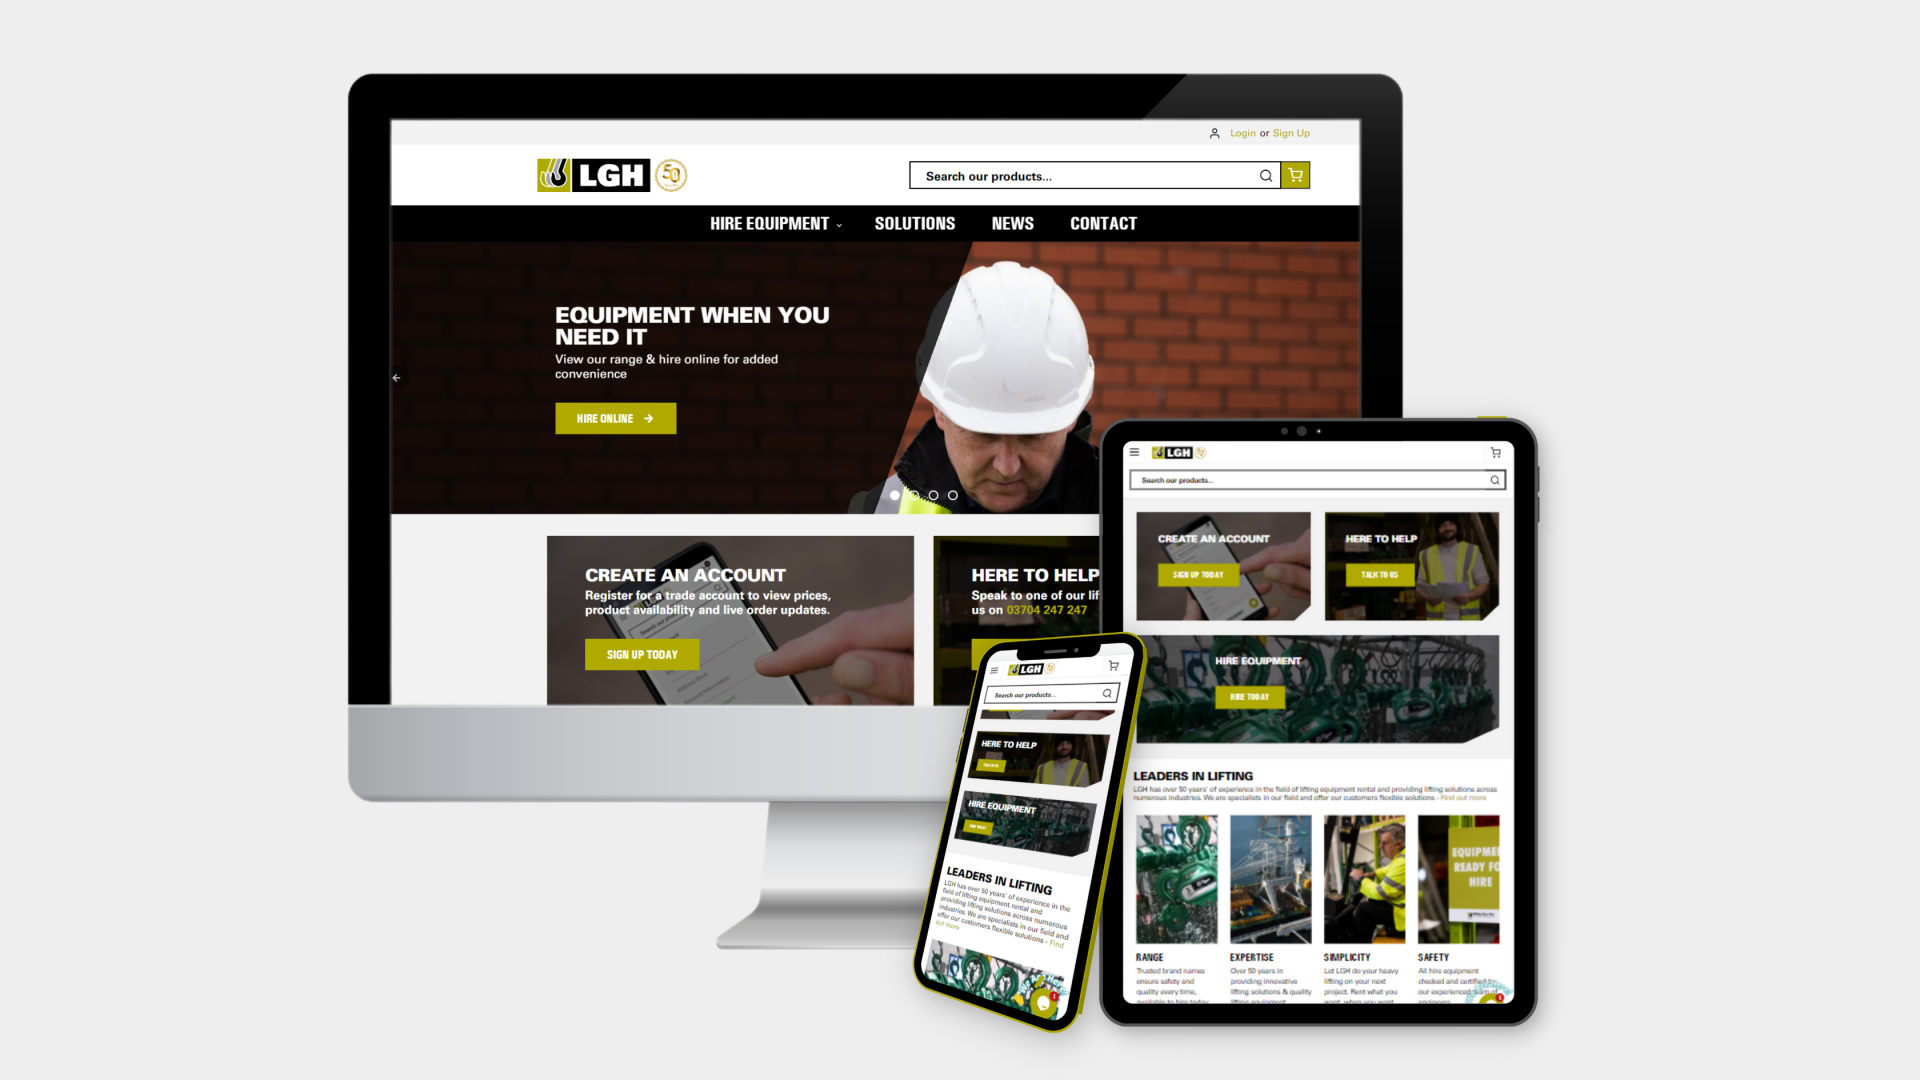  LGH Launches its New E-Commerce Site for Equipment Rental